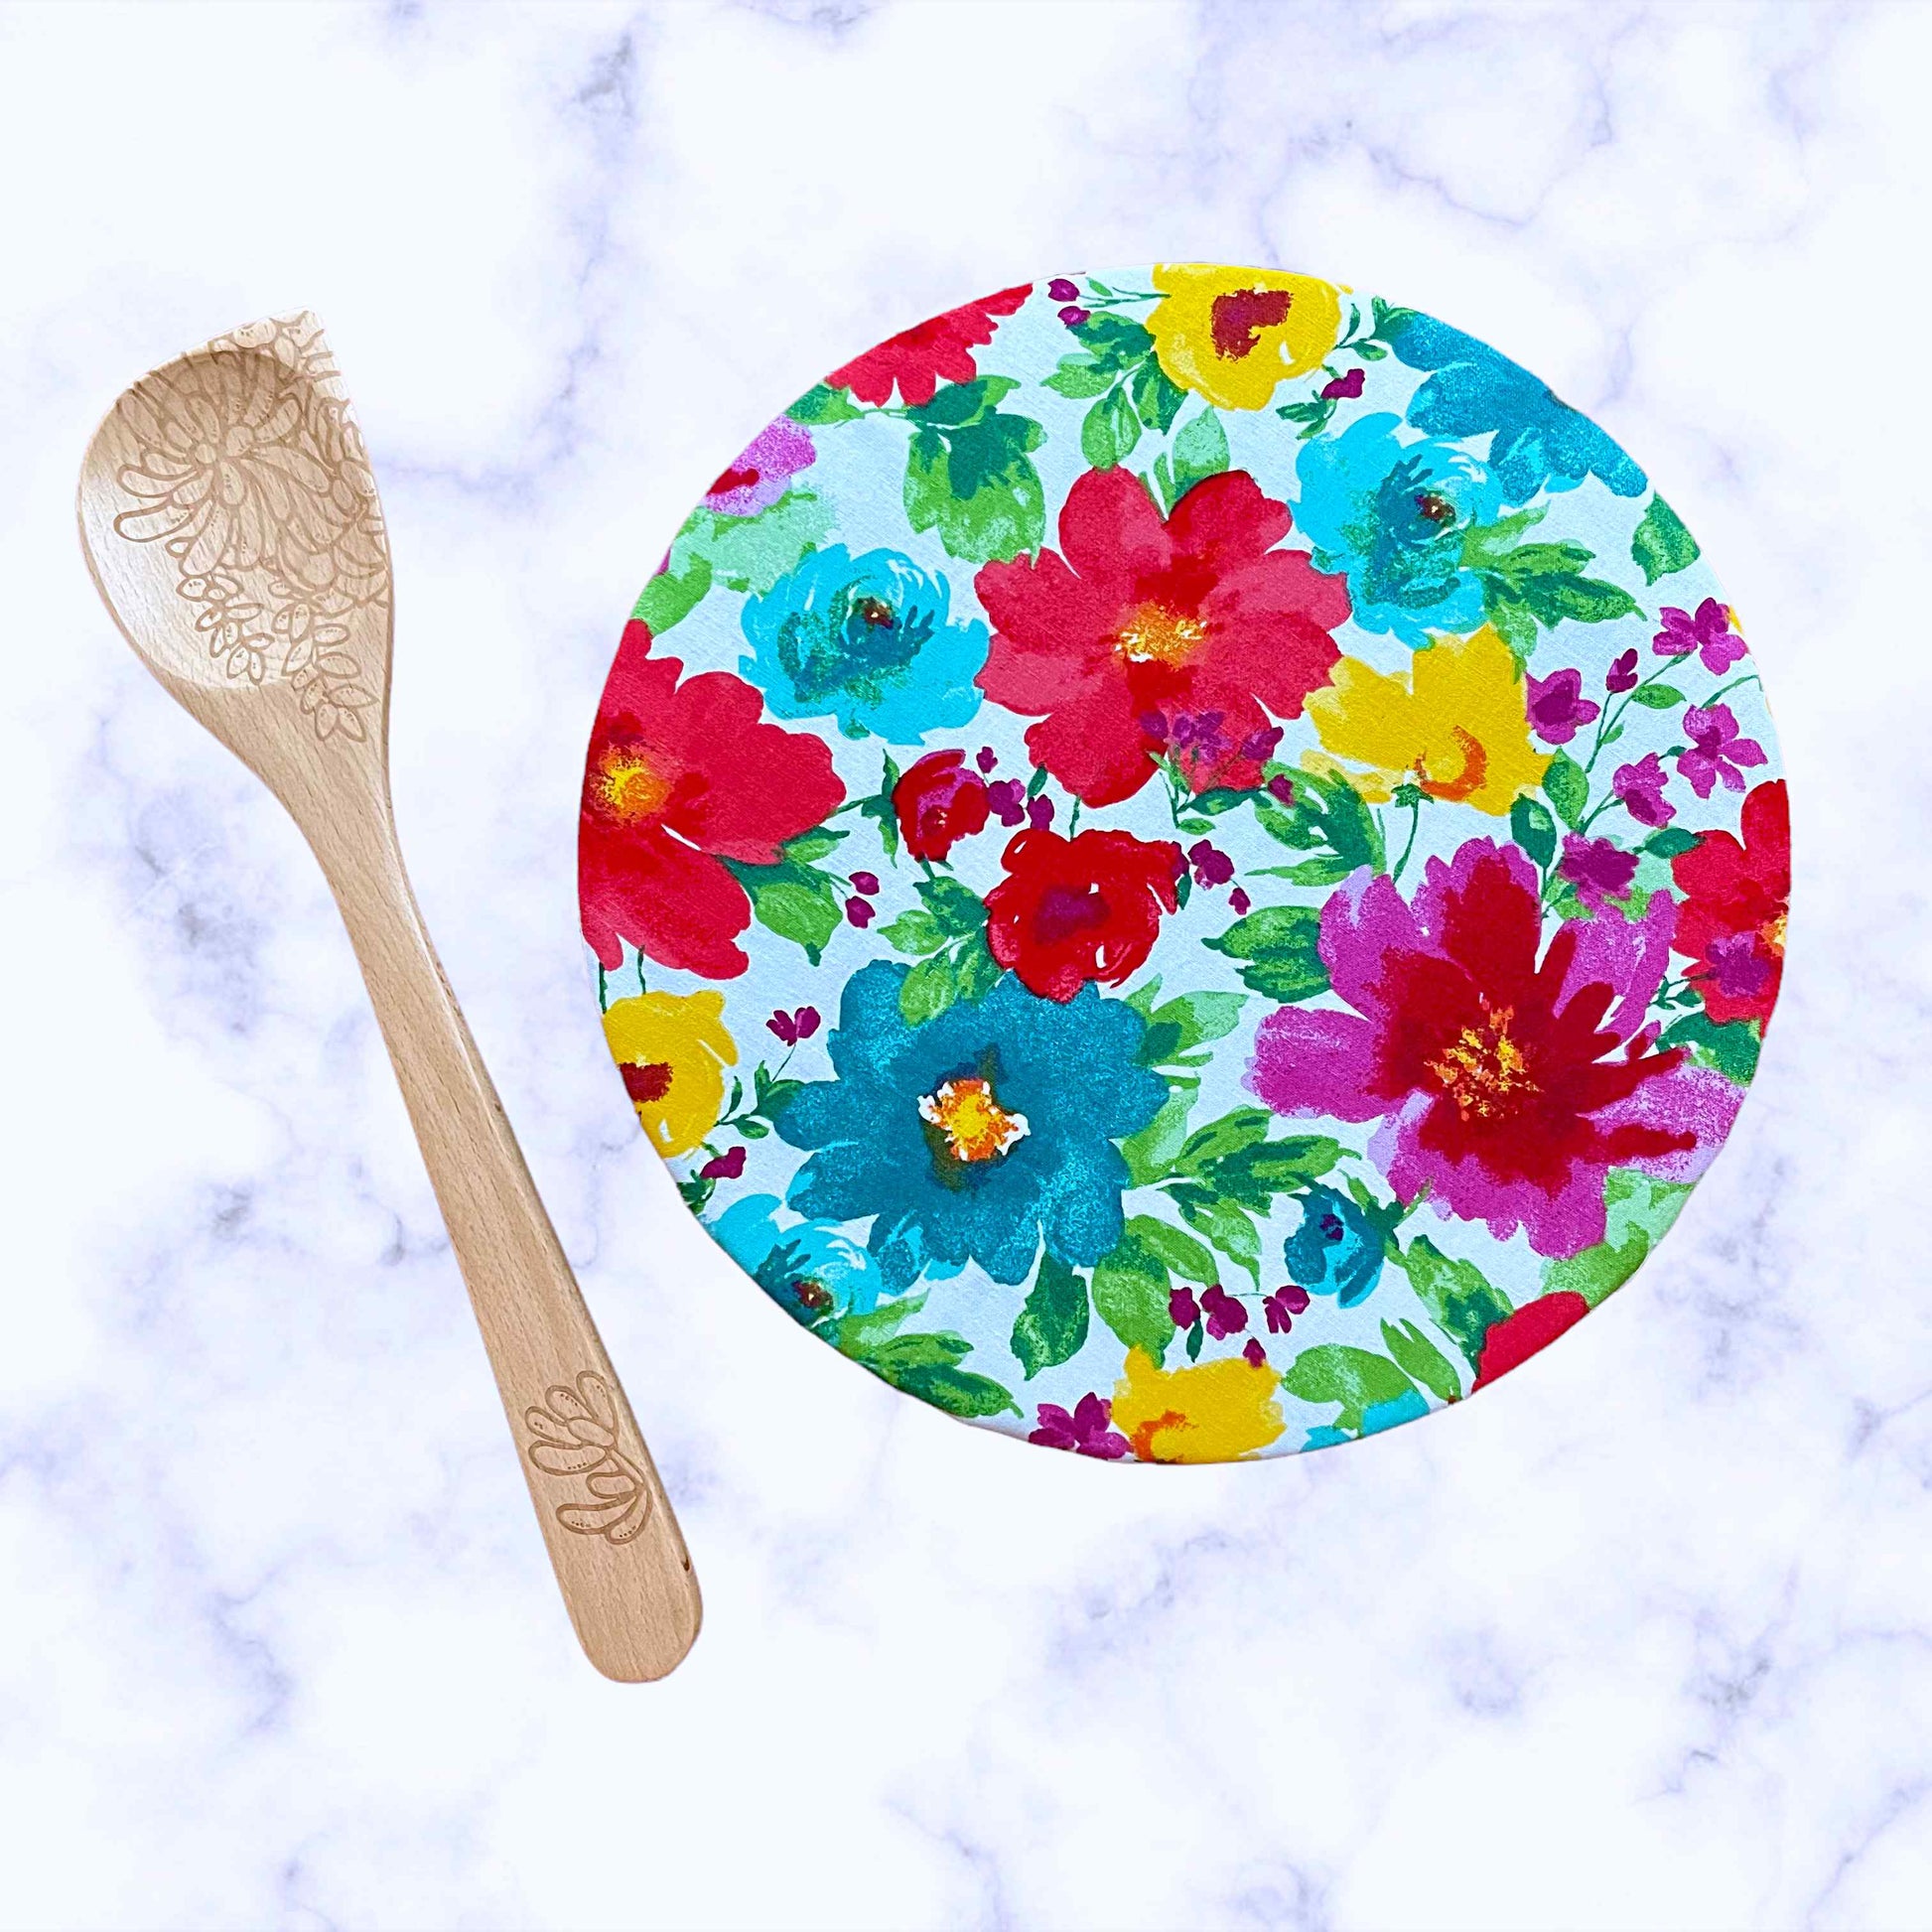 Stand Mixer Slider Mat - Pioneer Woman Vintage Floral – Dalisay